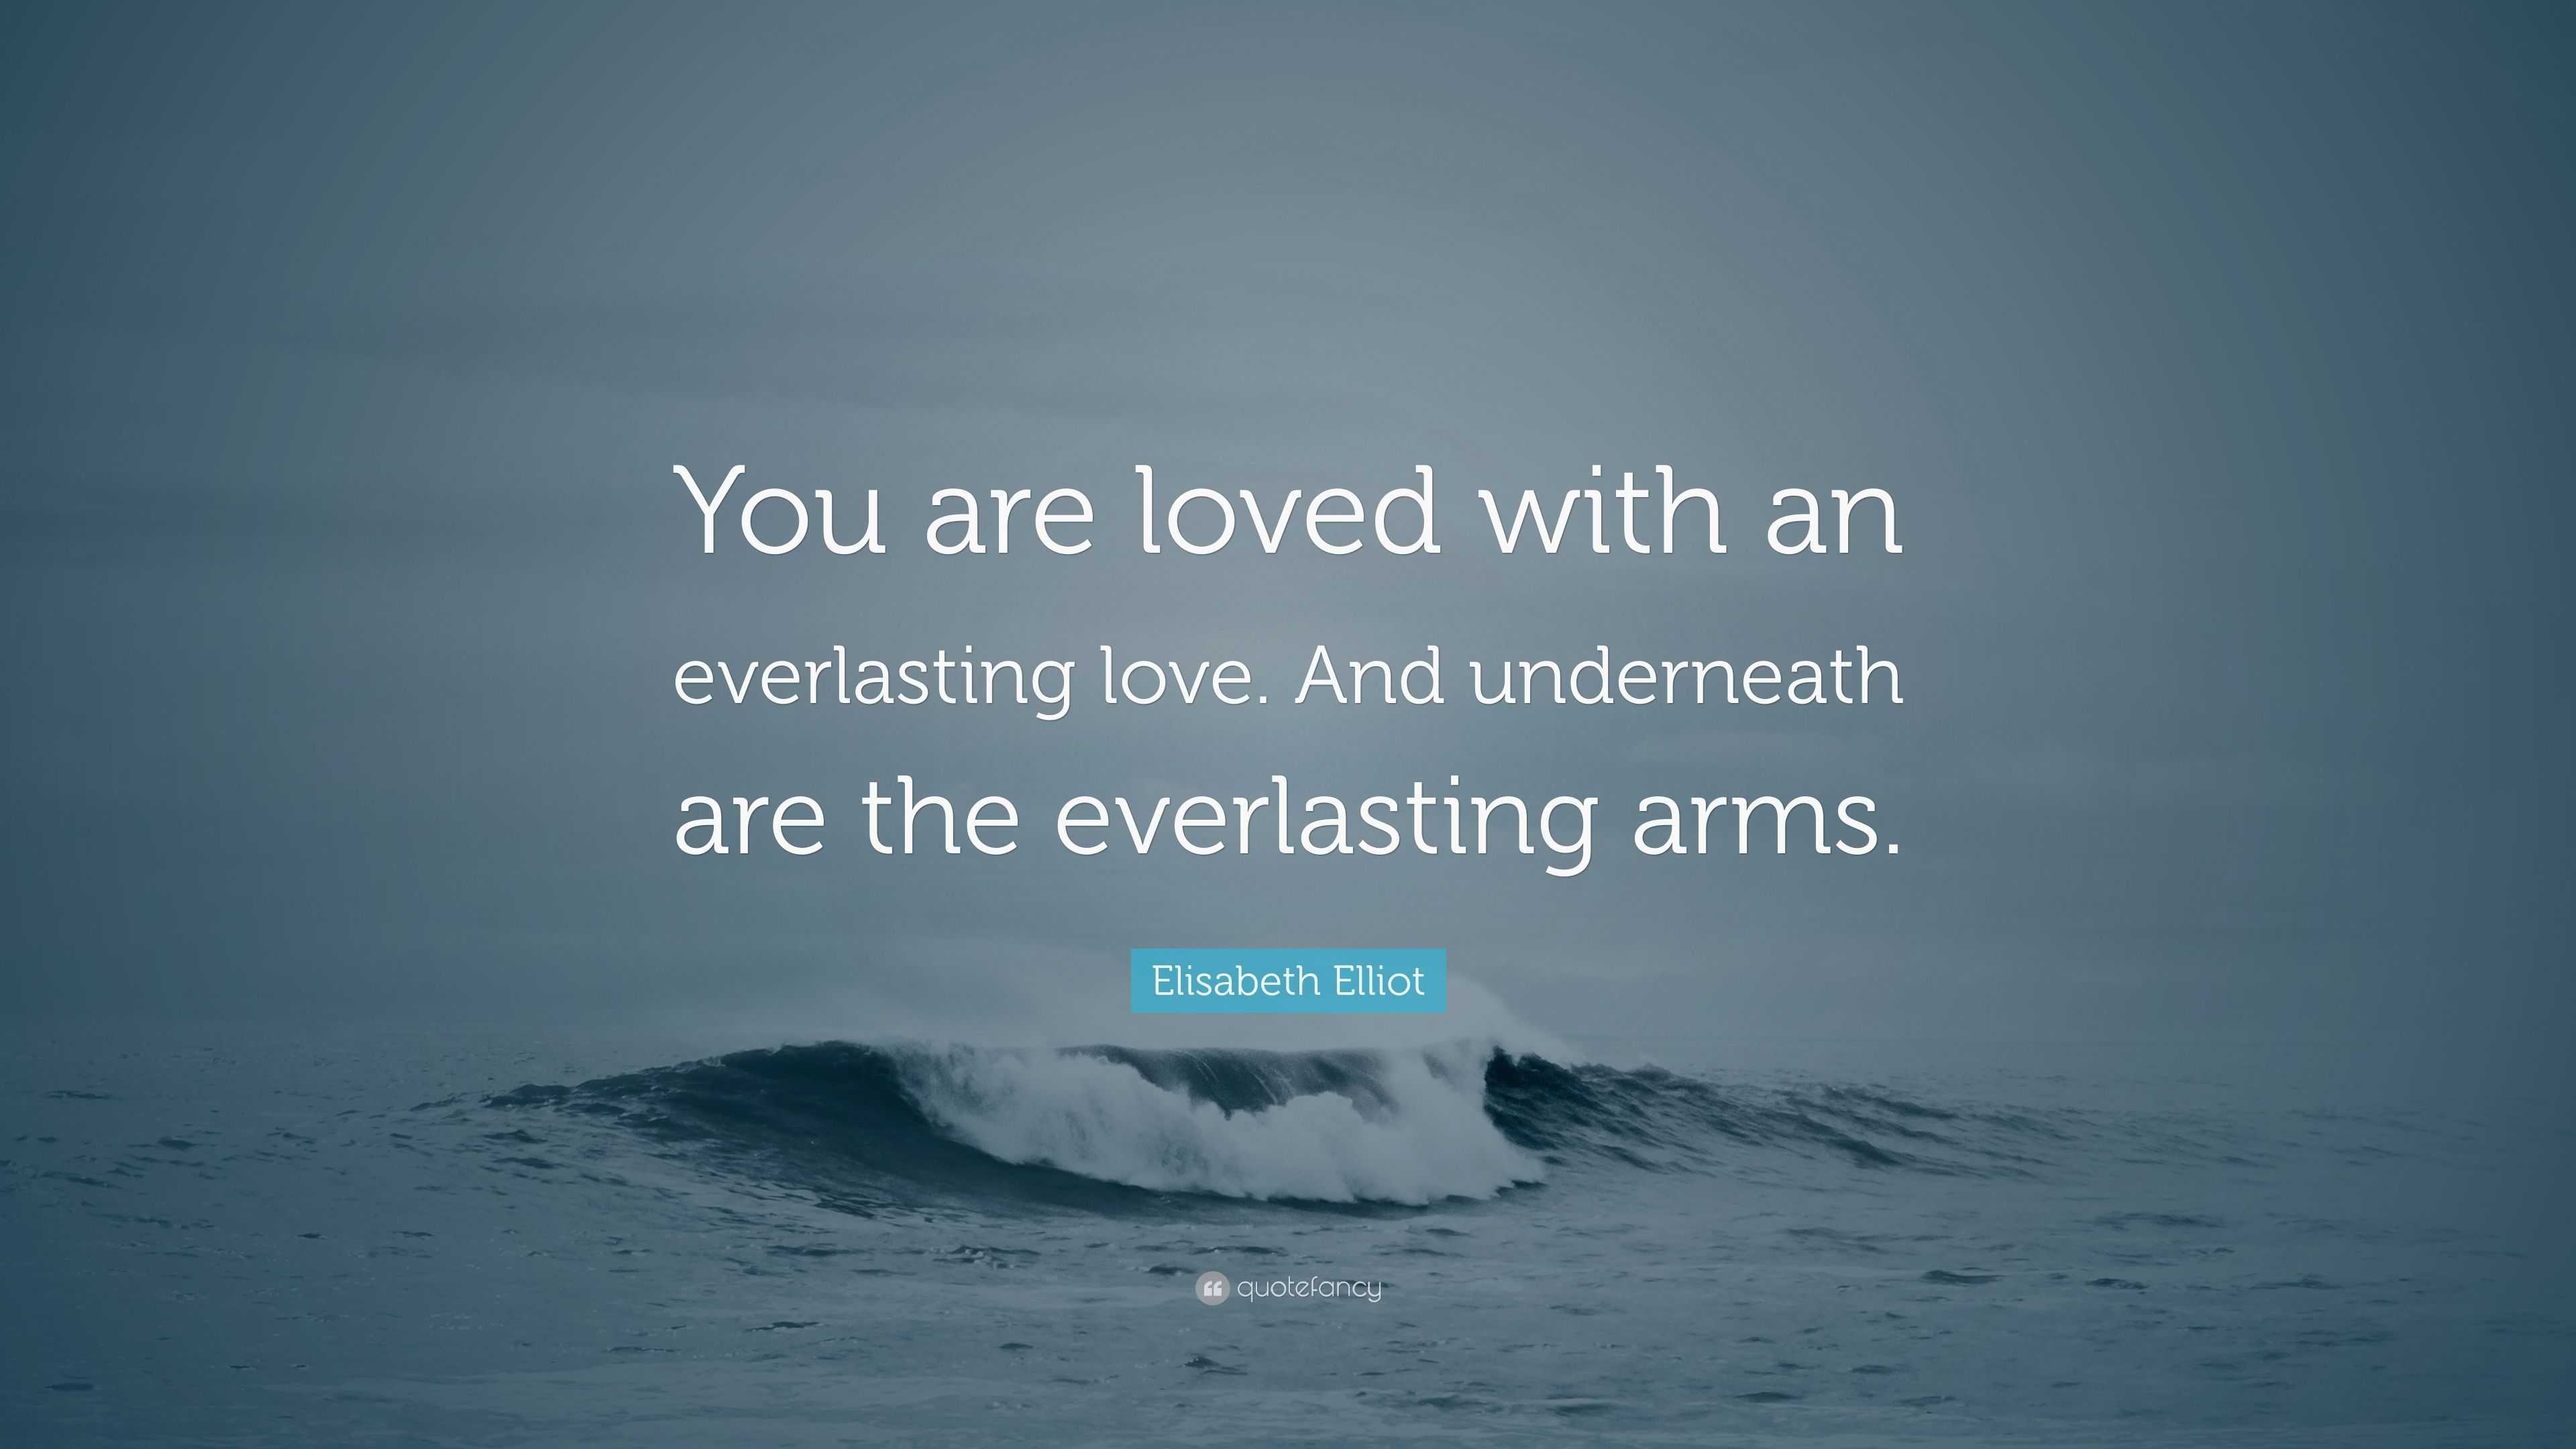 Elisabeth Elliot Quote  You are loved with an everlasting  